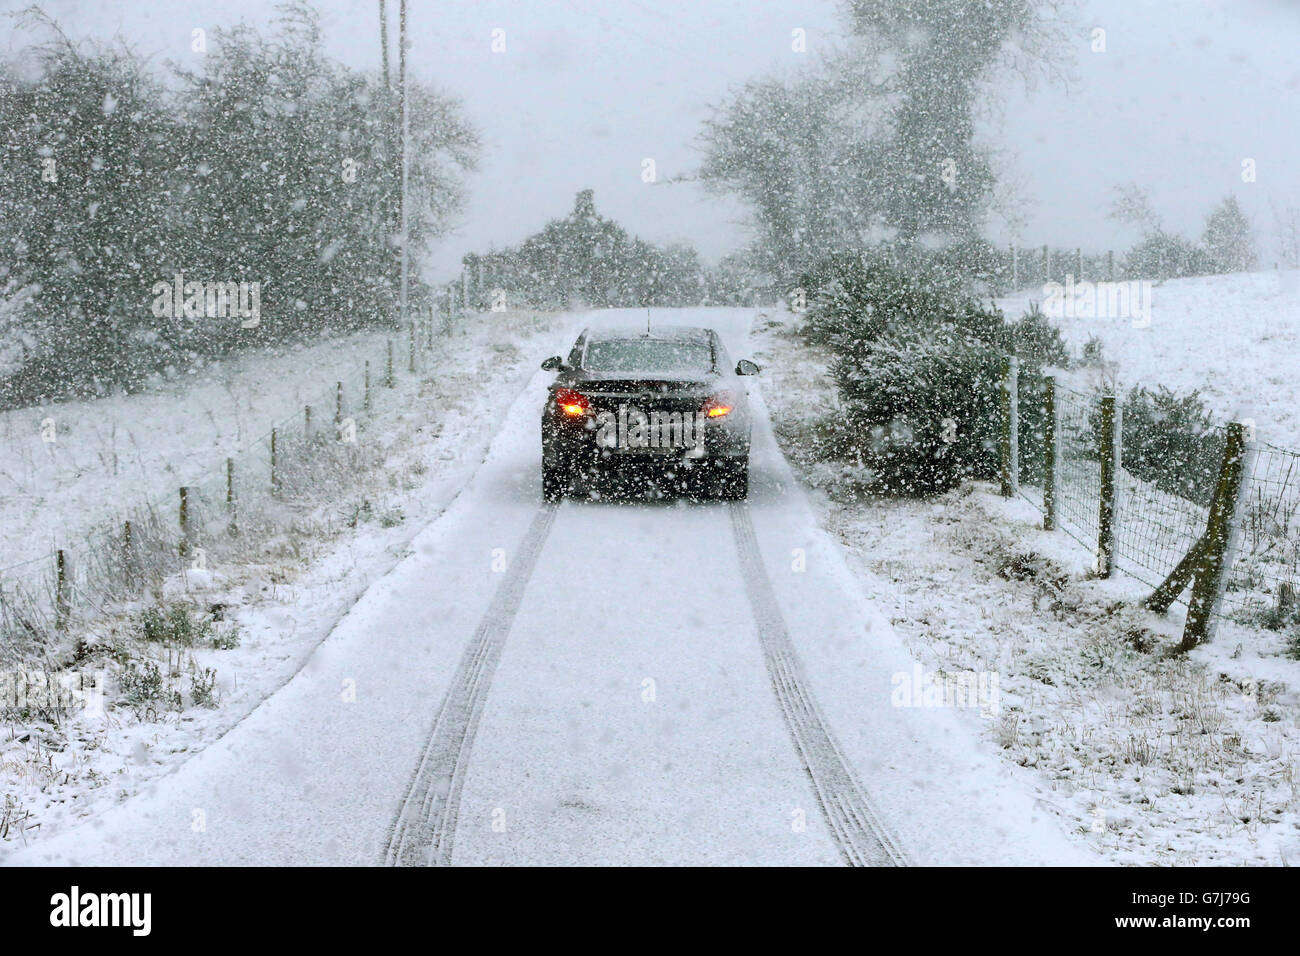 Motorists make their way through snowfall in Gortin near Omagh, as many parts of the UK were on snow alert with wintry showers threatening to disrupt travel. Stock Photo